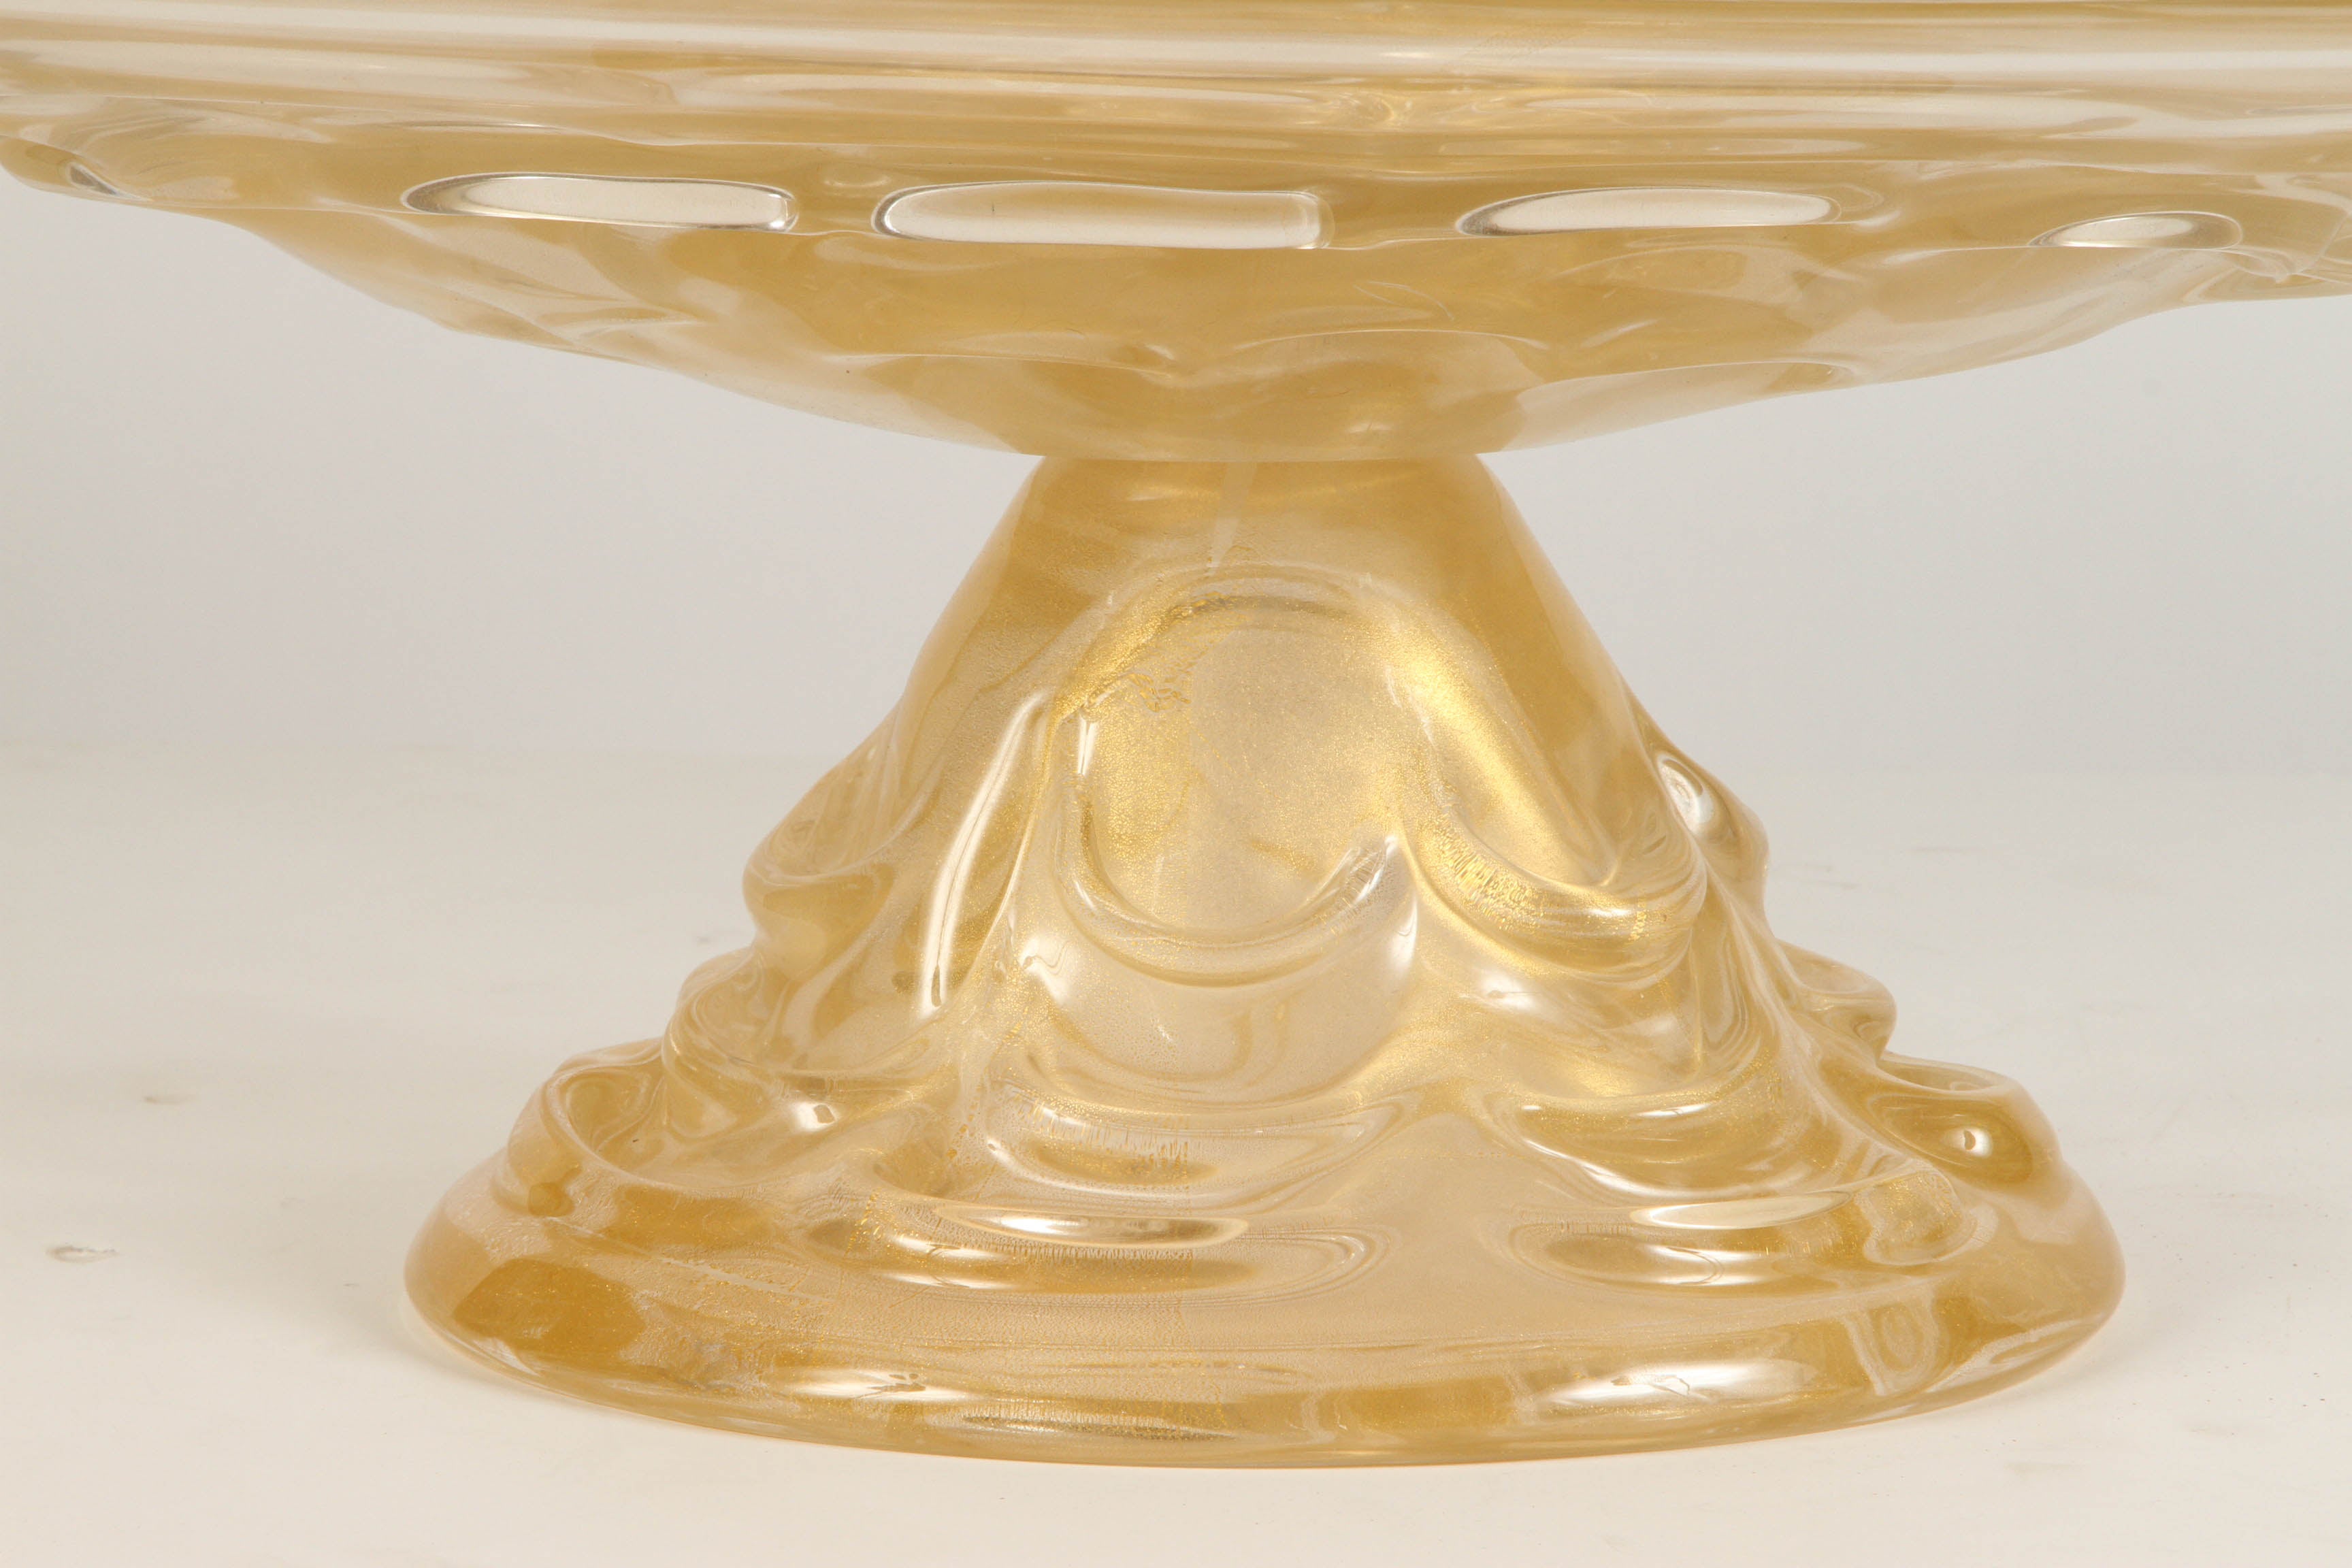 A 20th Century oval Murano pedestal bowl in glass that is light golden in color, and designed in a swag sort of pattern about the base. The foot is tall, at 9 inches. This Murano glass bowl is circa 1980.